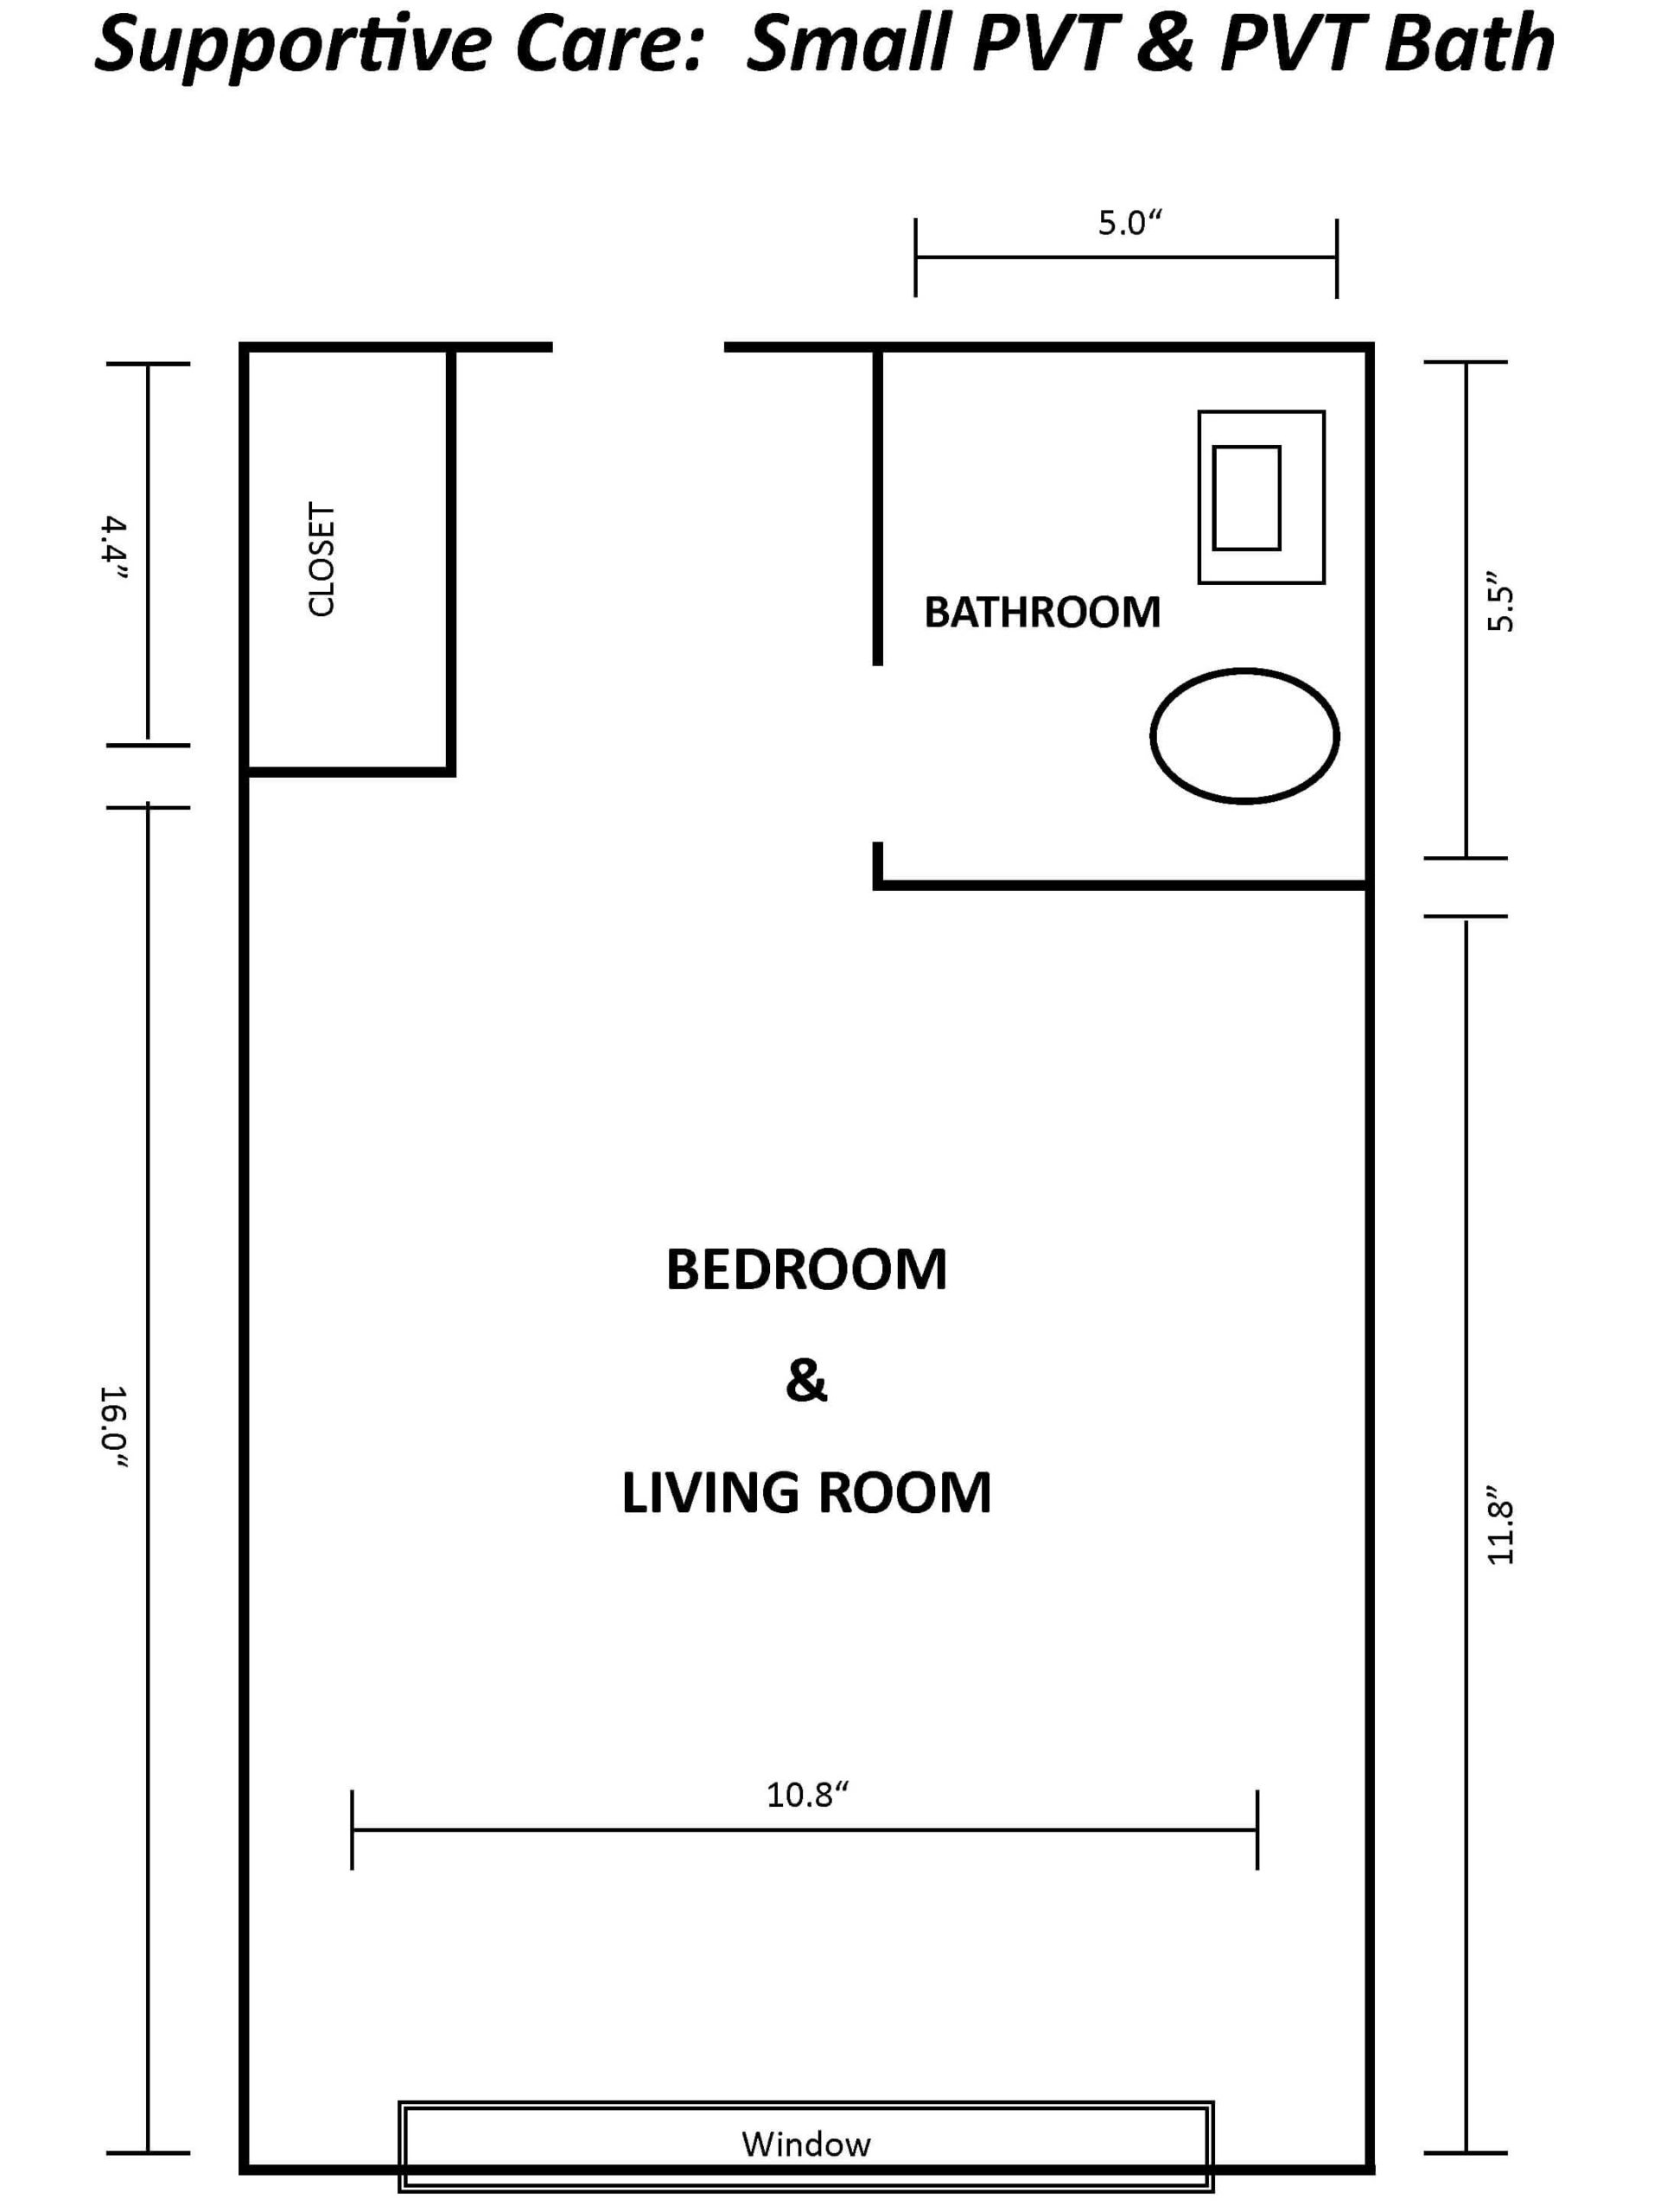 Small Private Room and Private Bath Floor Plan